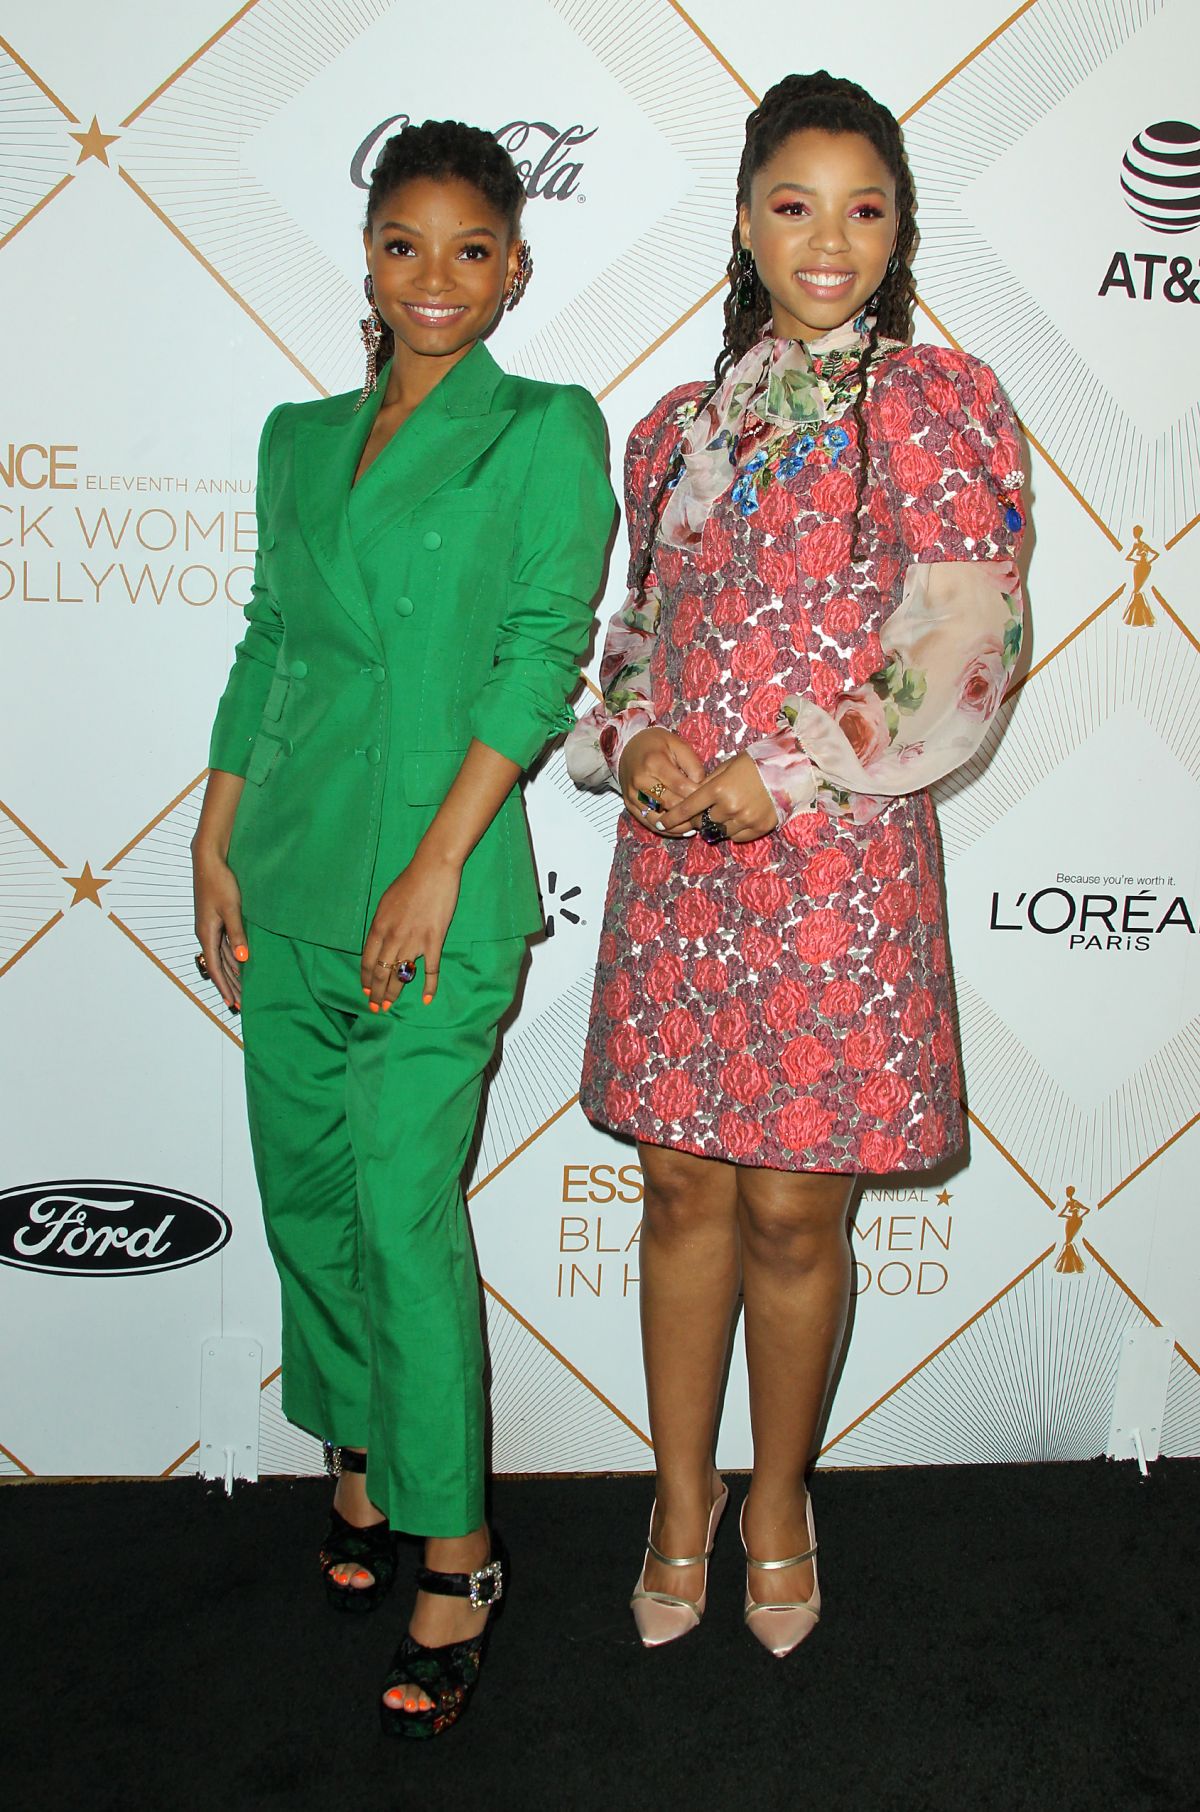 chloe-and-halle-bailey-at-2018-essence-black-women-in-hollywood-luncheon-in-beverly-hills-03-01-2018-0.jpg